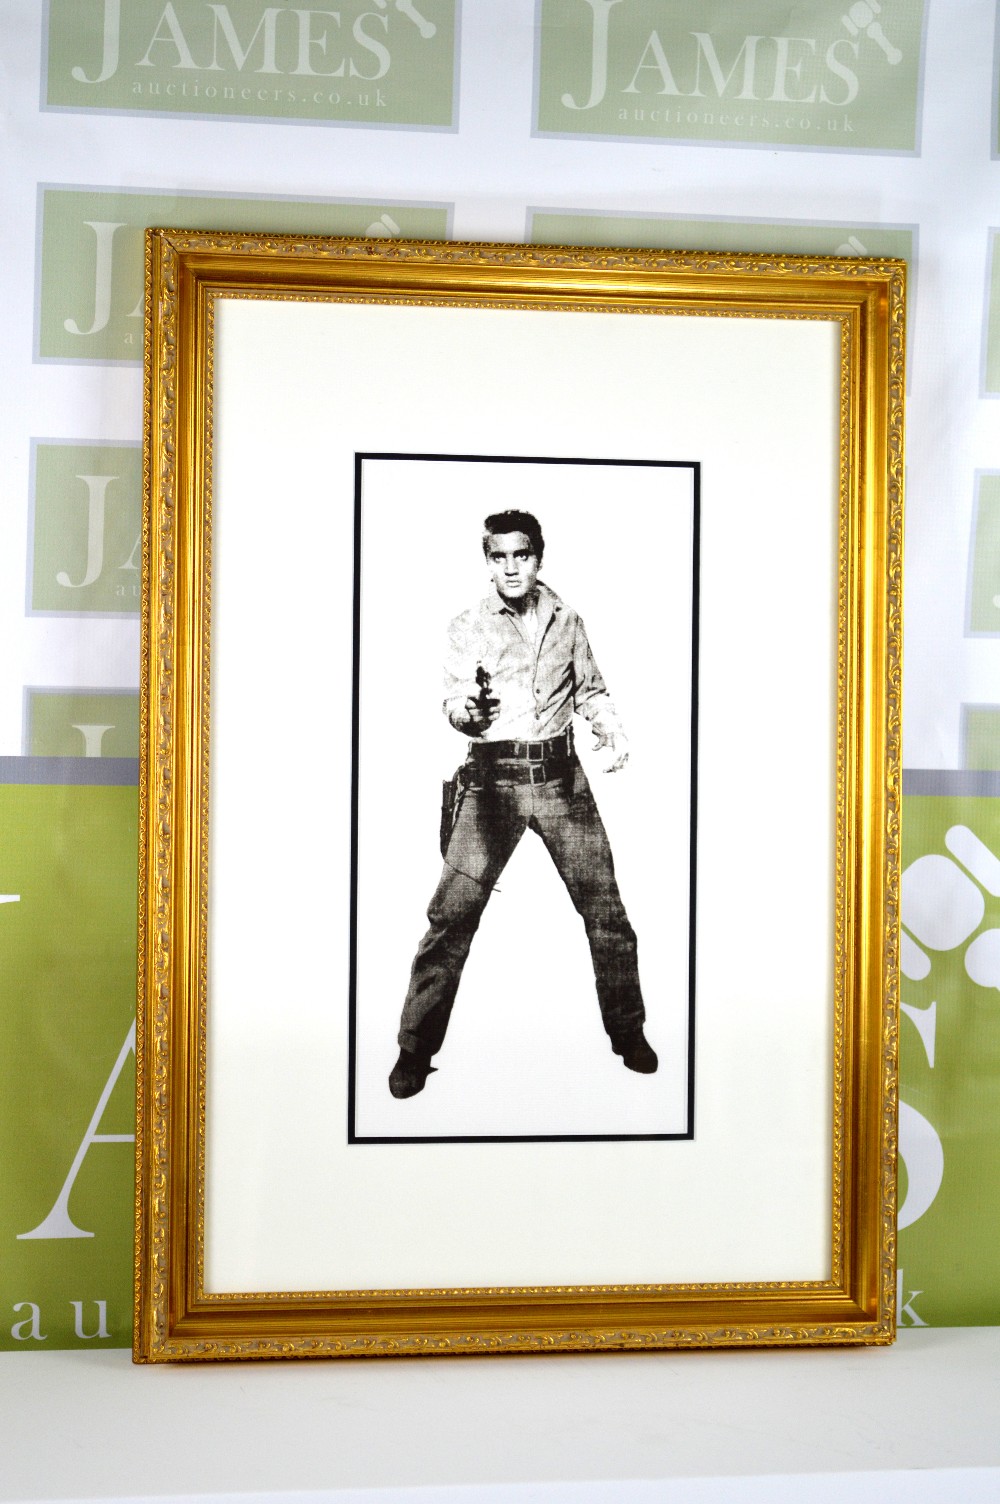 Extremely Rare Andy Warhol "Foundation" Lithograph Elvis Presley canvas print, framed, RRP£1500 - Image 3 of 3